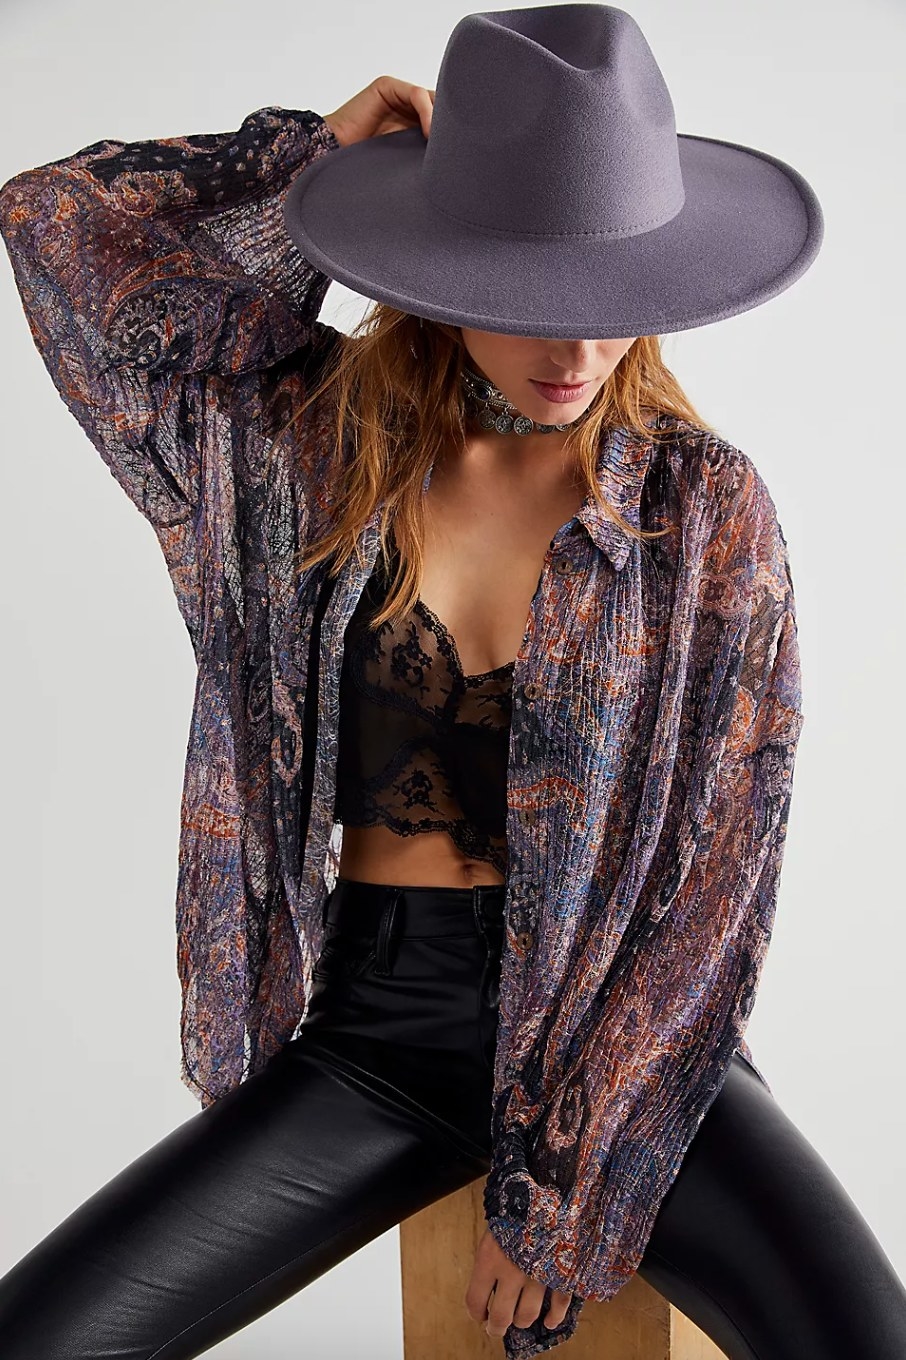 a model wearing the grey felt hat, a patterned shirt, black bralette, and black leather pants